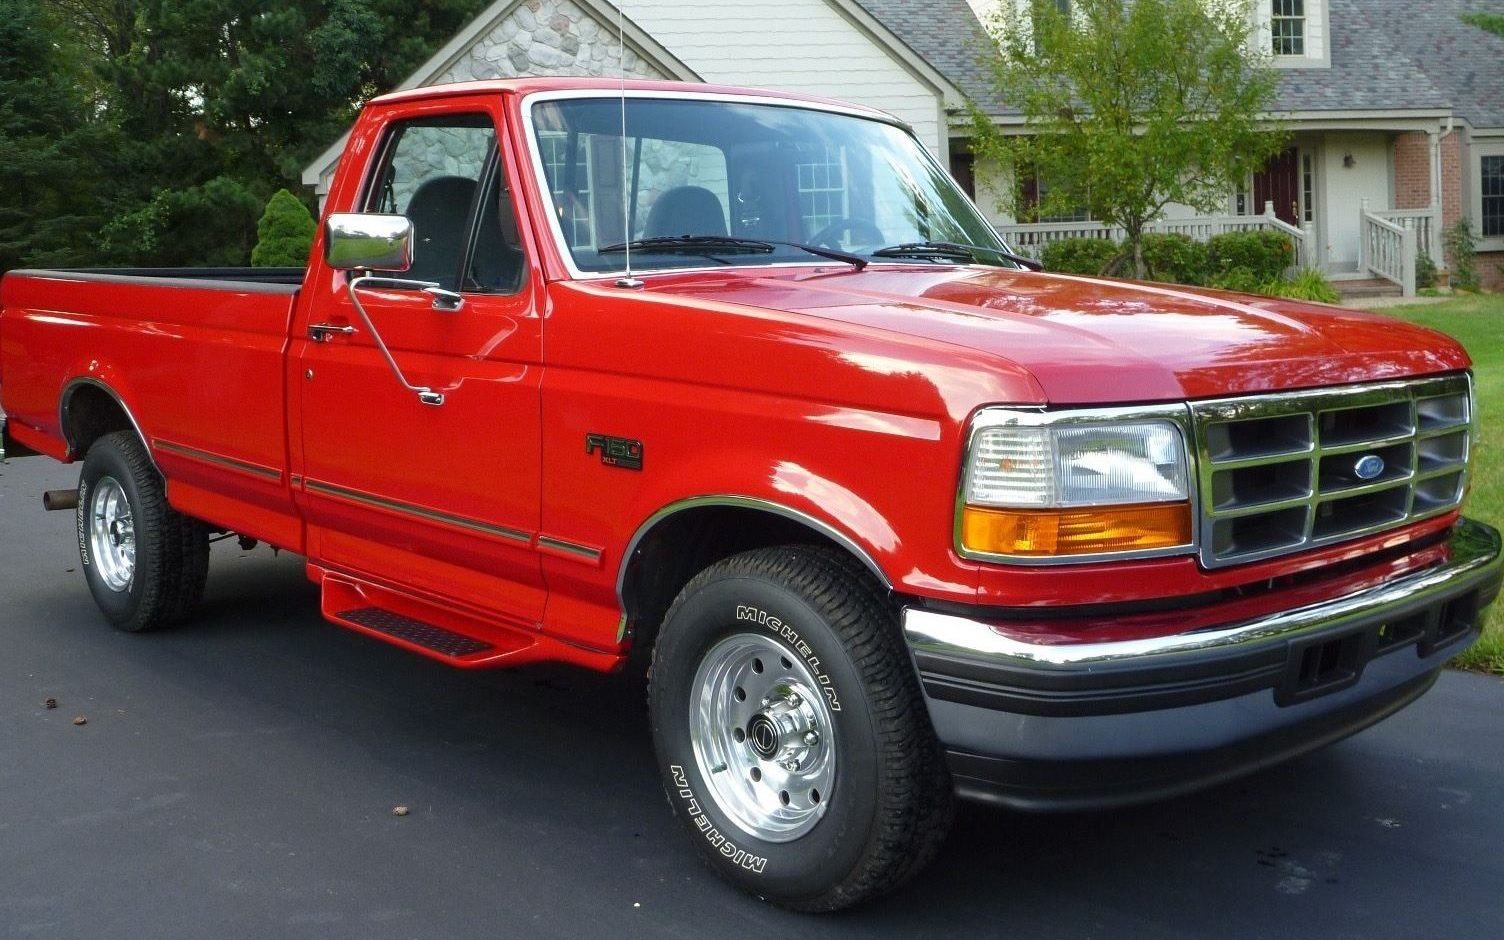 11,000 Mile Workhorse: 1996 Ford F-150.